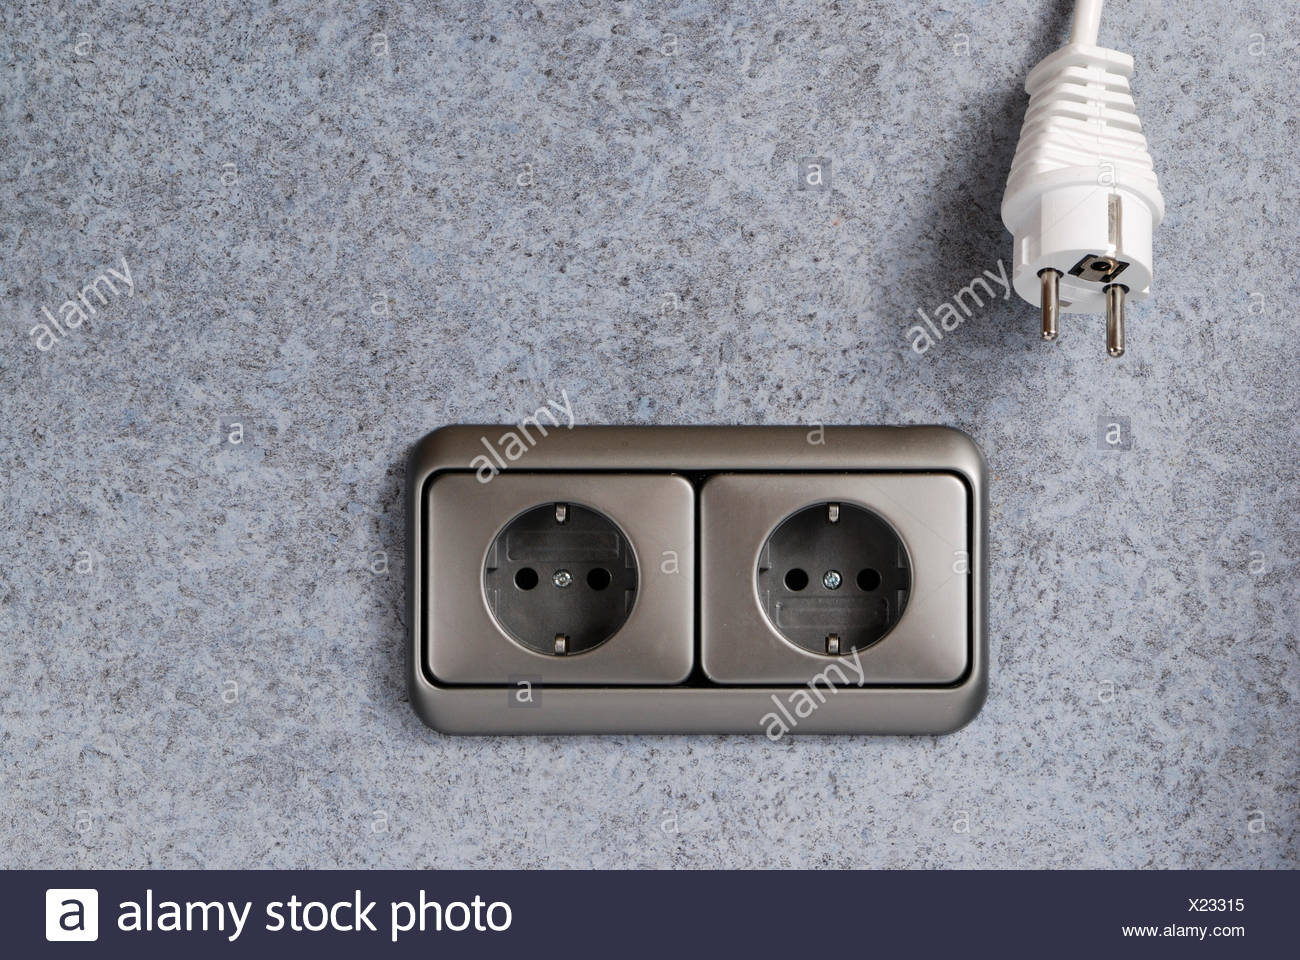 energy power electricity electric power wall electric outlet ...